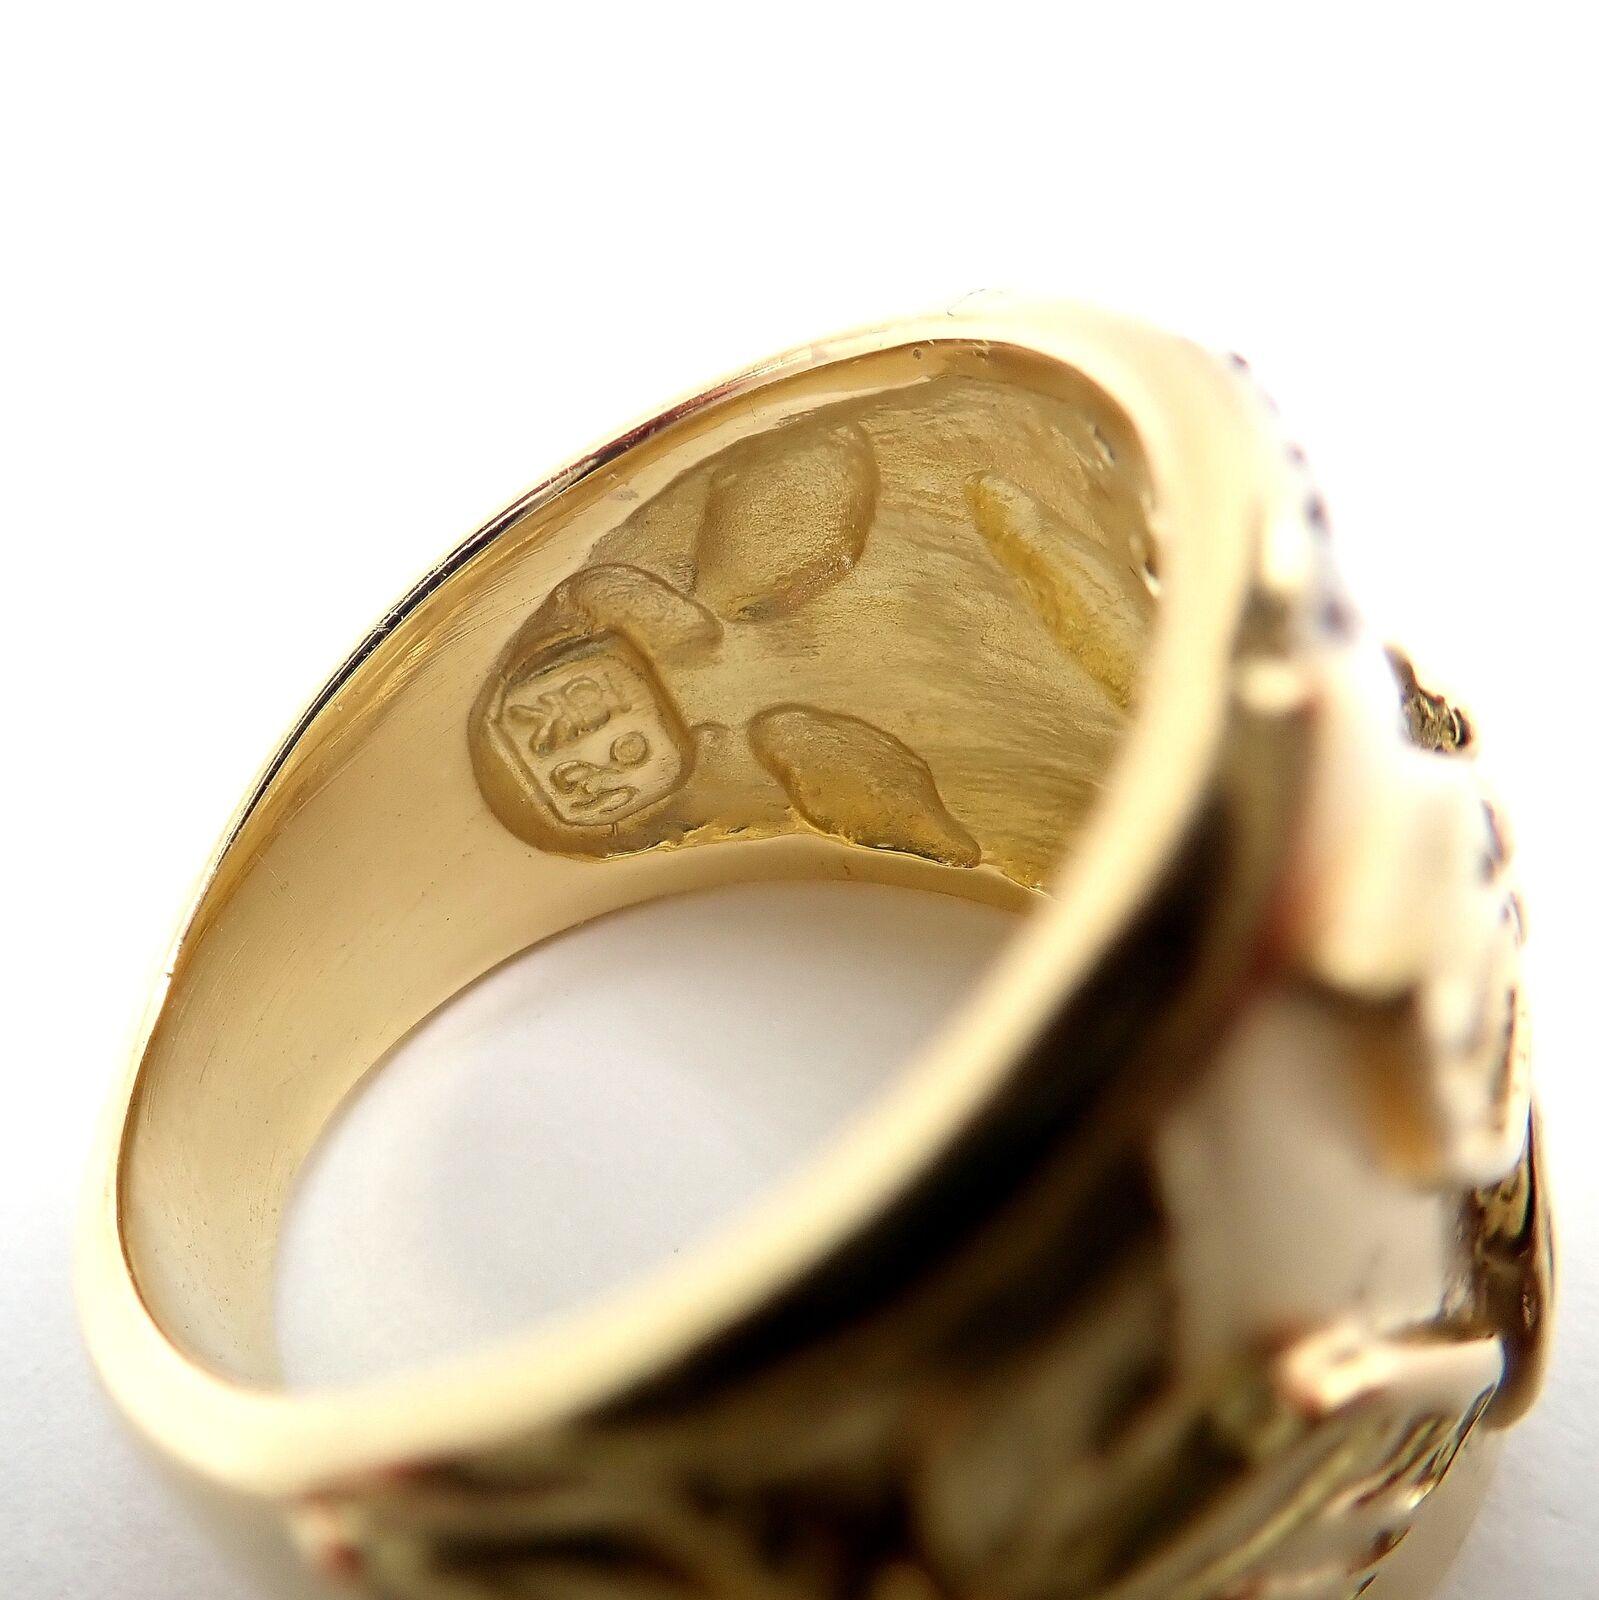 SeidenGang Jewelry & Watches:Fine Jewelry:Rings Rare! Vintage SeidenGang 18k Yellow Gold Diamond Butterfly Ring Sz 6